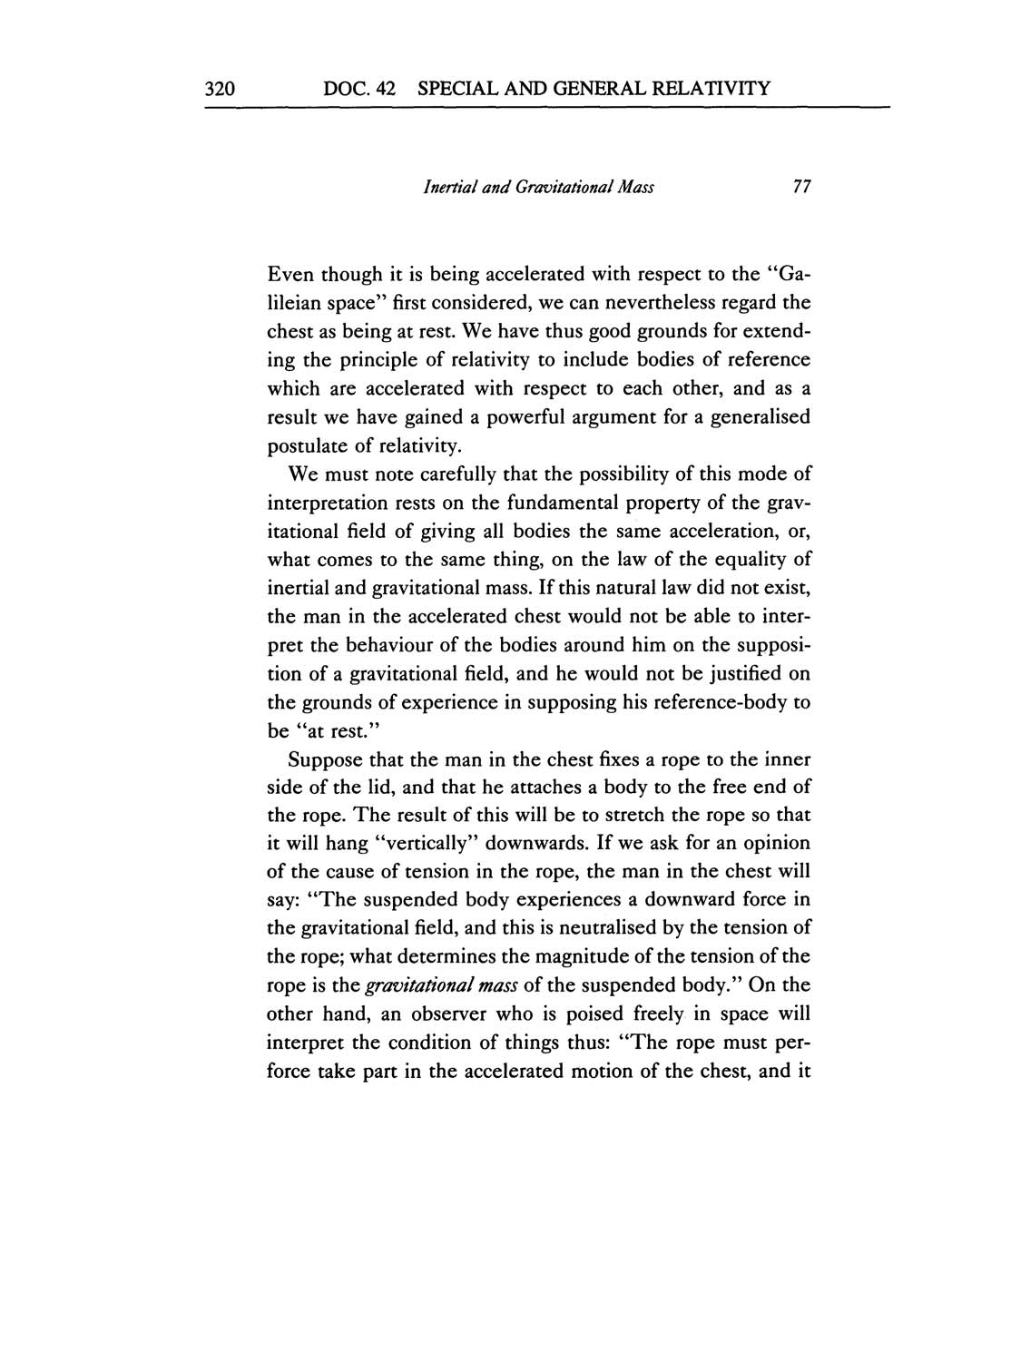 Volume 6: The Berlin Years: Writings, 1914-1917 (English translation supplement) page 320